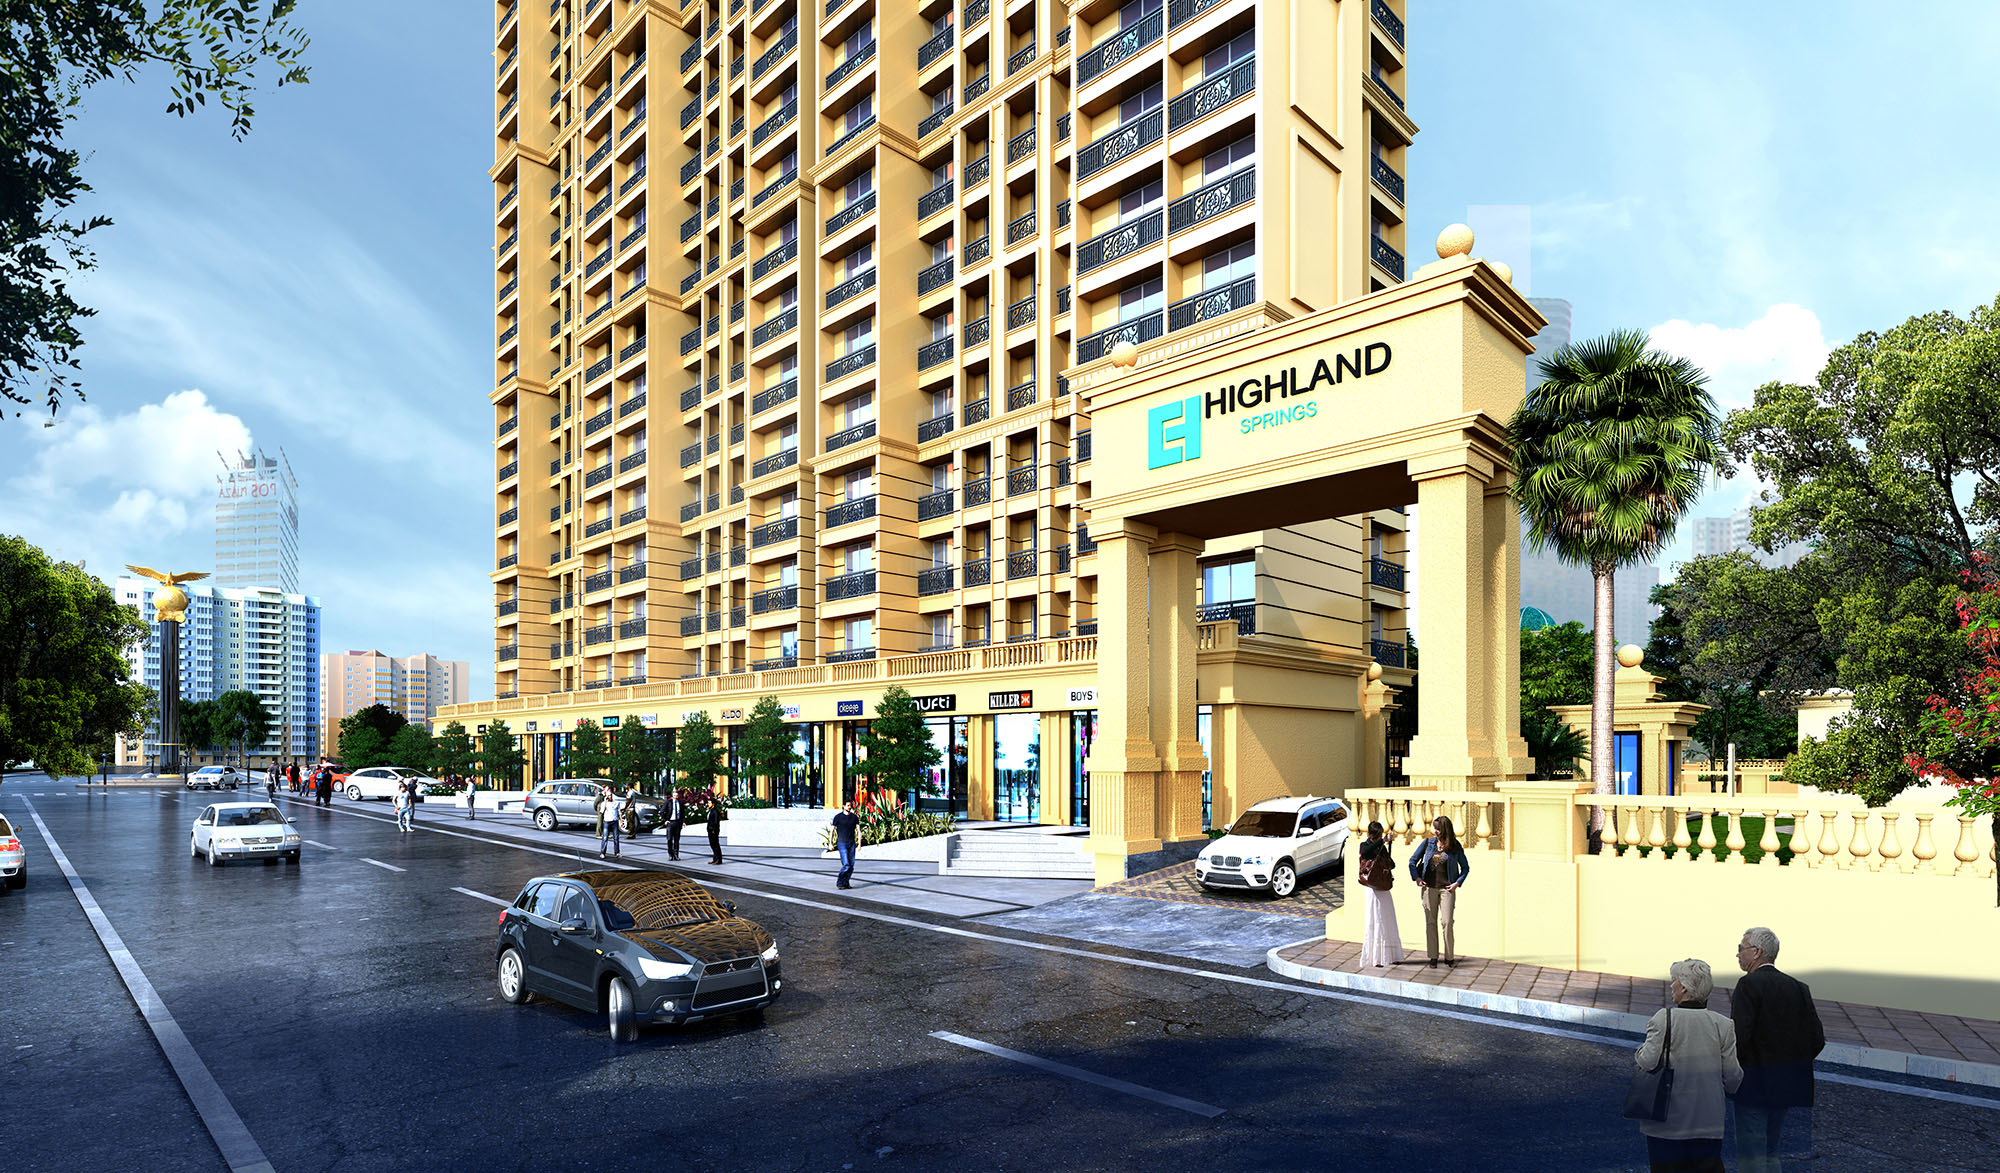 Siddhi Group Highland Spring Residential 2BHK 1BHK Flats in Thane